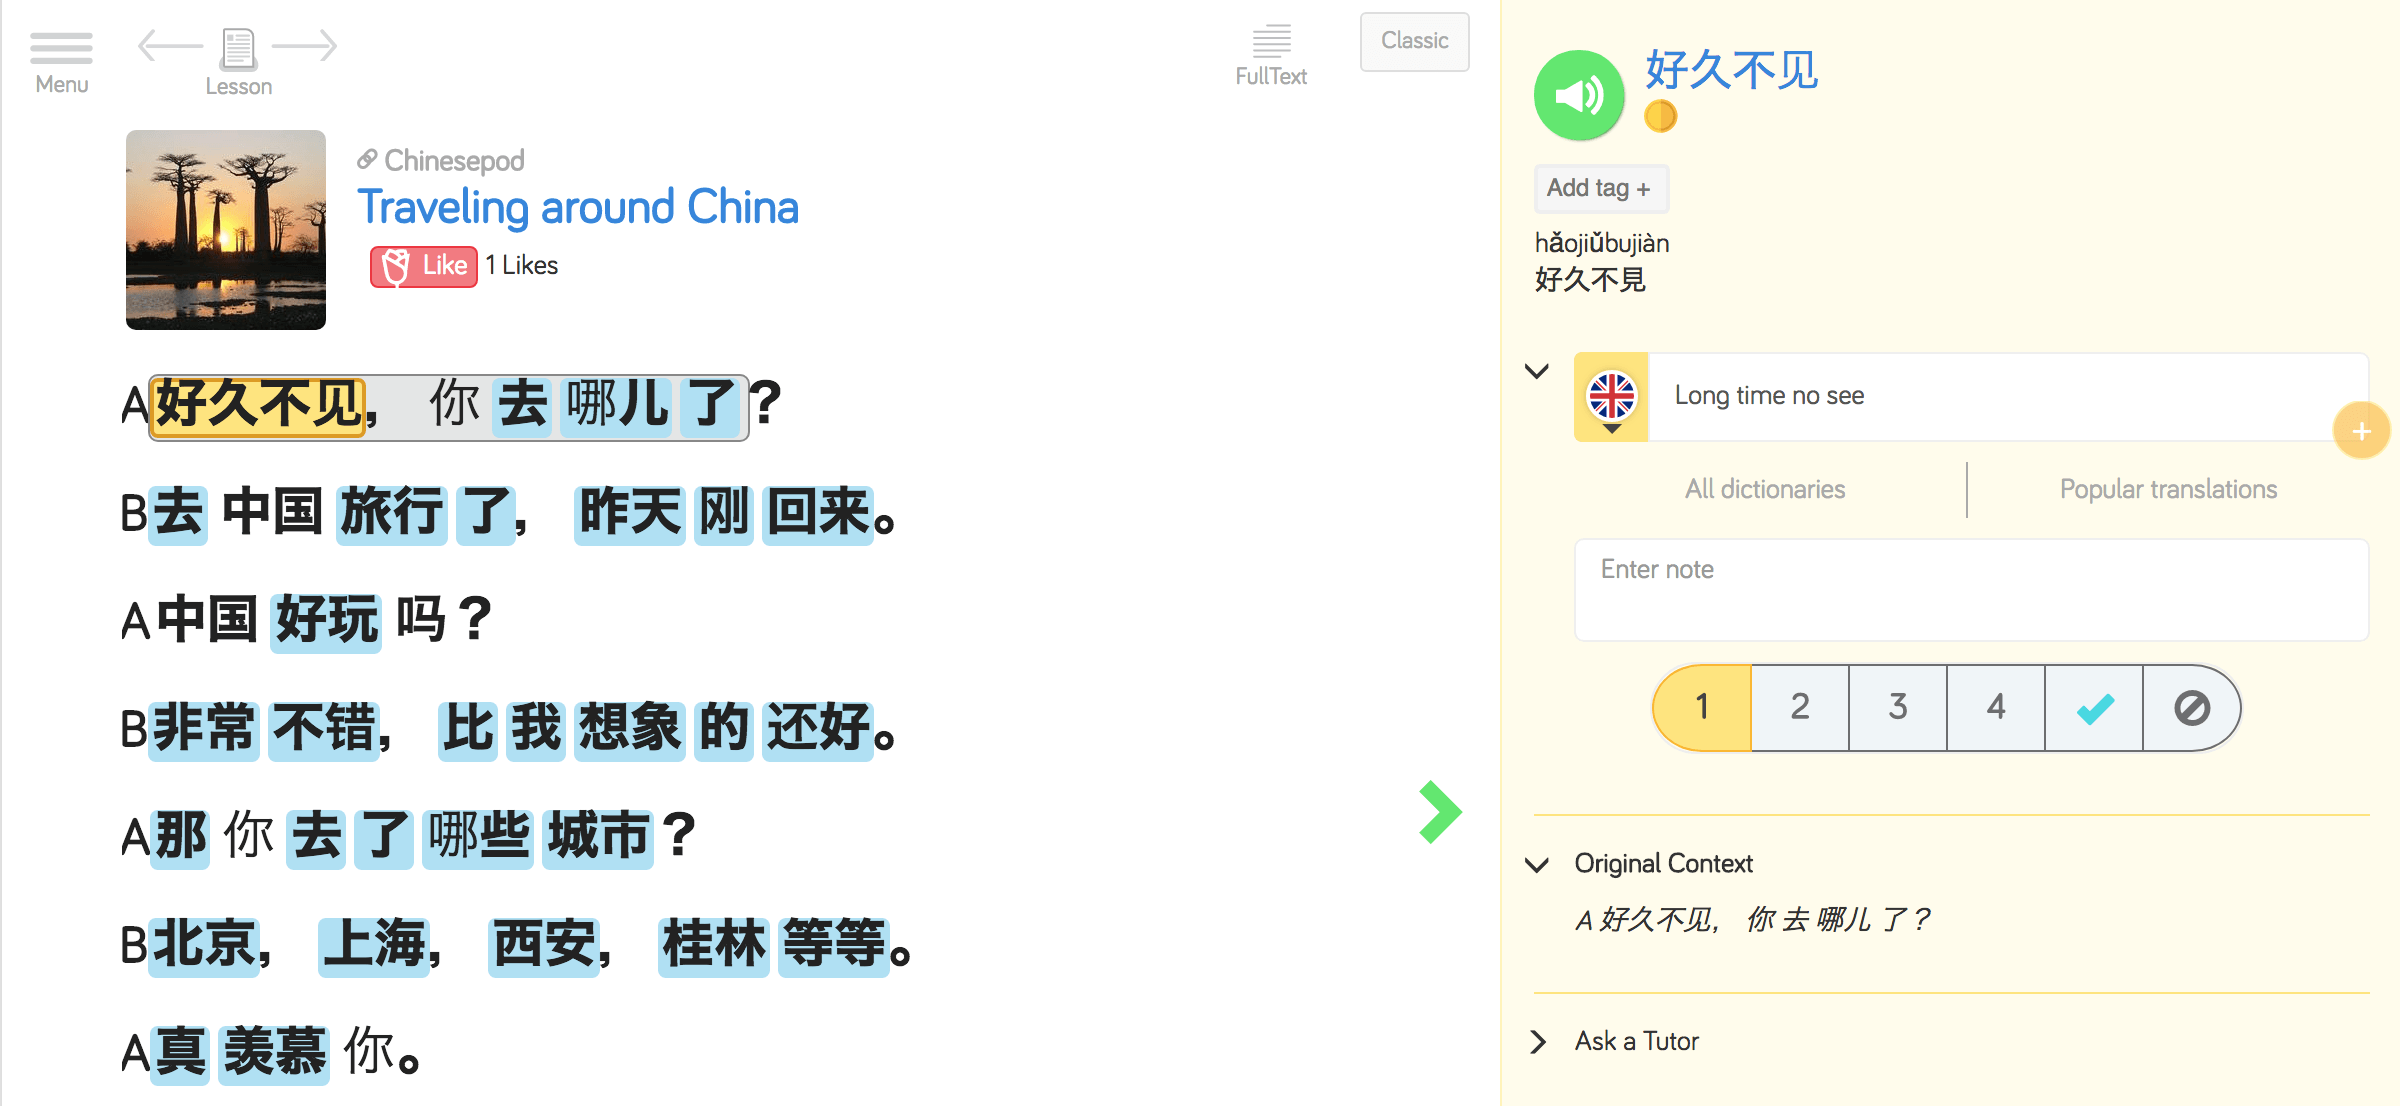 Learn Chinese online at LingQ